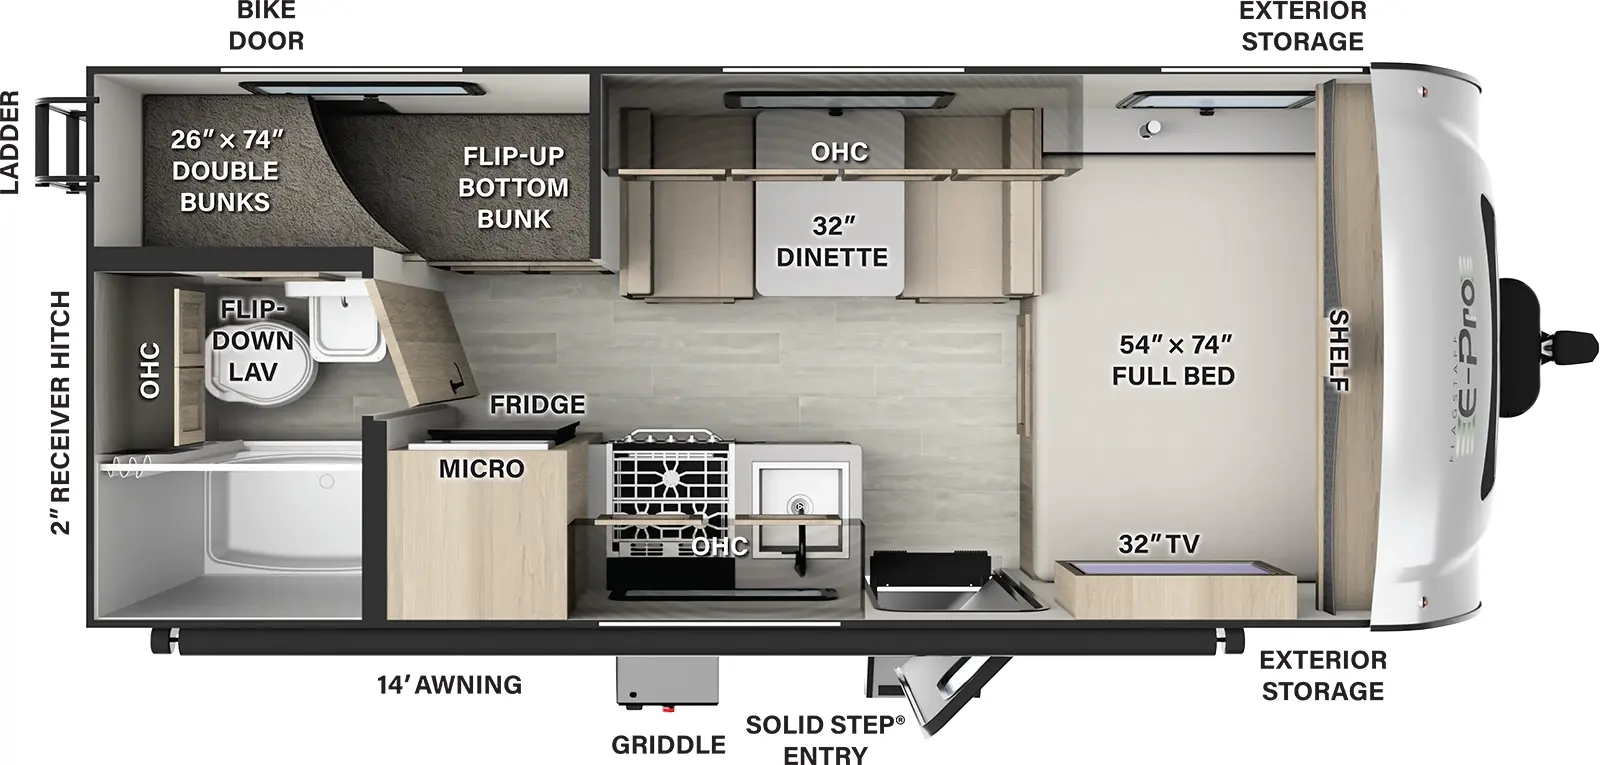 The E19BH has no slide outs and 1 entry door. Exterior features storage, a rear ladder, 2 inch receiver hitch, bike door, griddle, solid step entry, and 14 foot awning. Interior layout front to back: side-facing full bed with shelf above, and door side TV; off-door side dinette with overhead cabinet; door side entry, kitchen counter with sink, cooktop, overhead cabinet, microwave and refrigerator; rear door side full bathroom with overhead cabinet, and flip-down lavatory; rear off-door side double bunks with flip-up bottom bunk.